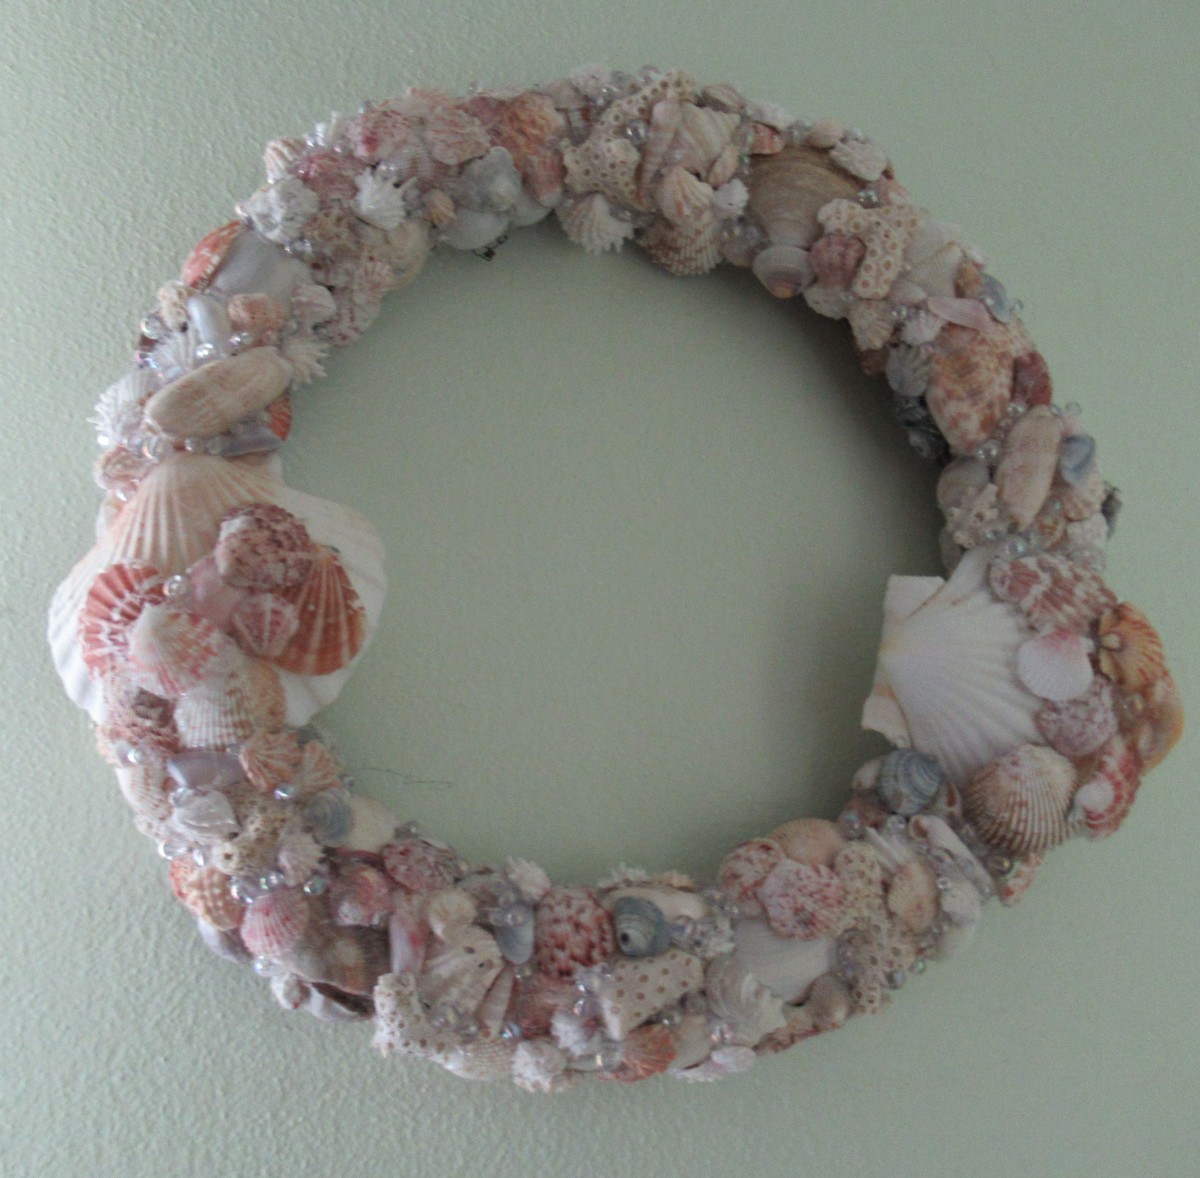 Displaying your shell collections on wreaths is a way to keep those beach memories alive.